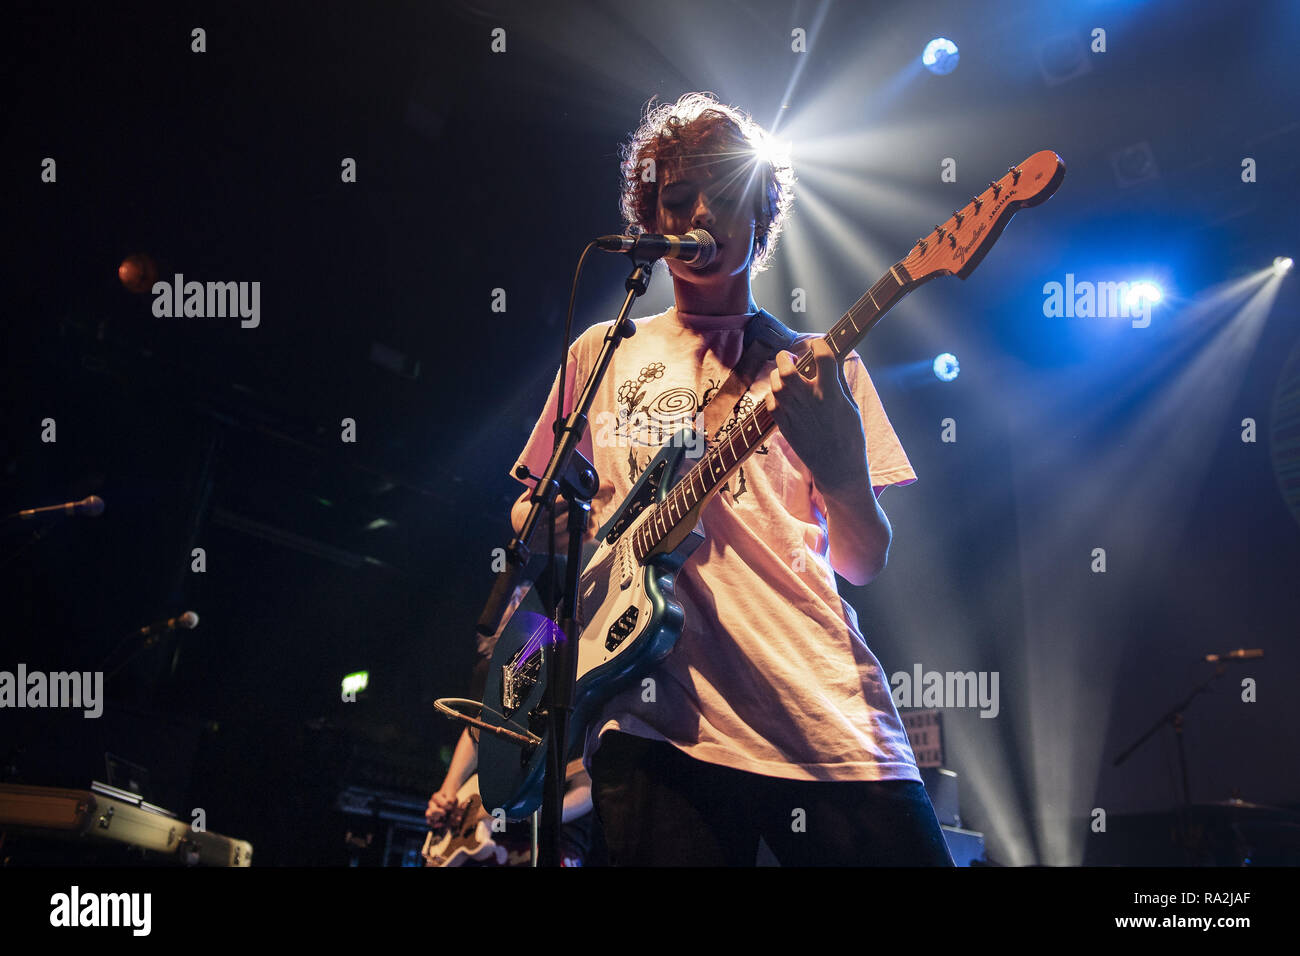 Calpurnia, fronted by 'Stranger Things' actor Finn Wolfhard, perform a sold out show at Koko  Featuring: Finn Wolfhard, Calpurnia Where: London, United Kingdom When: 29 Nov 2018 Credit: Simon Reed/WENN.com Stock Photo